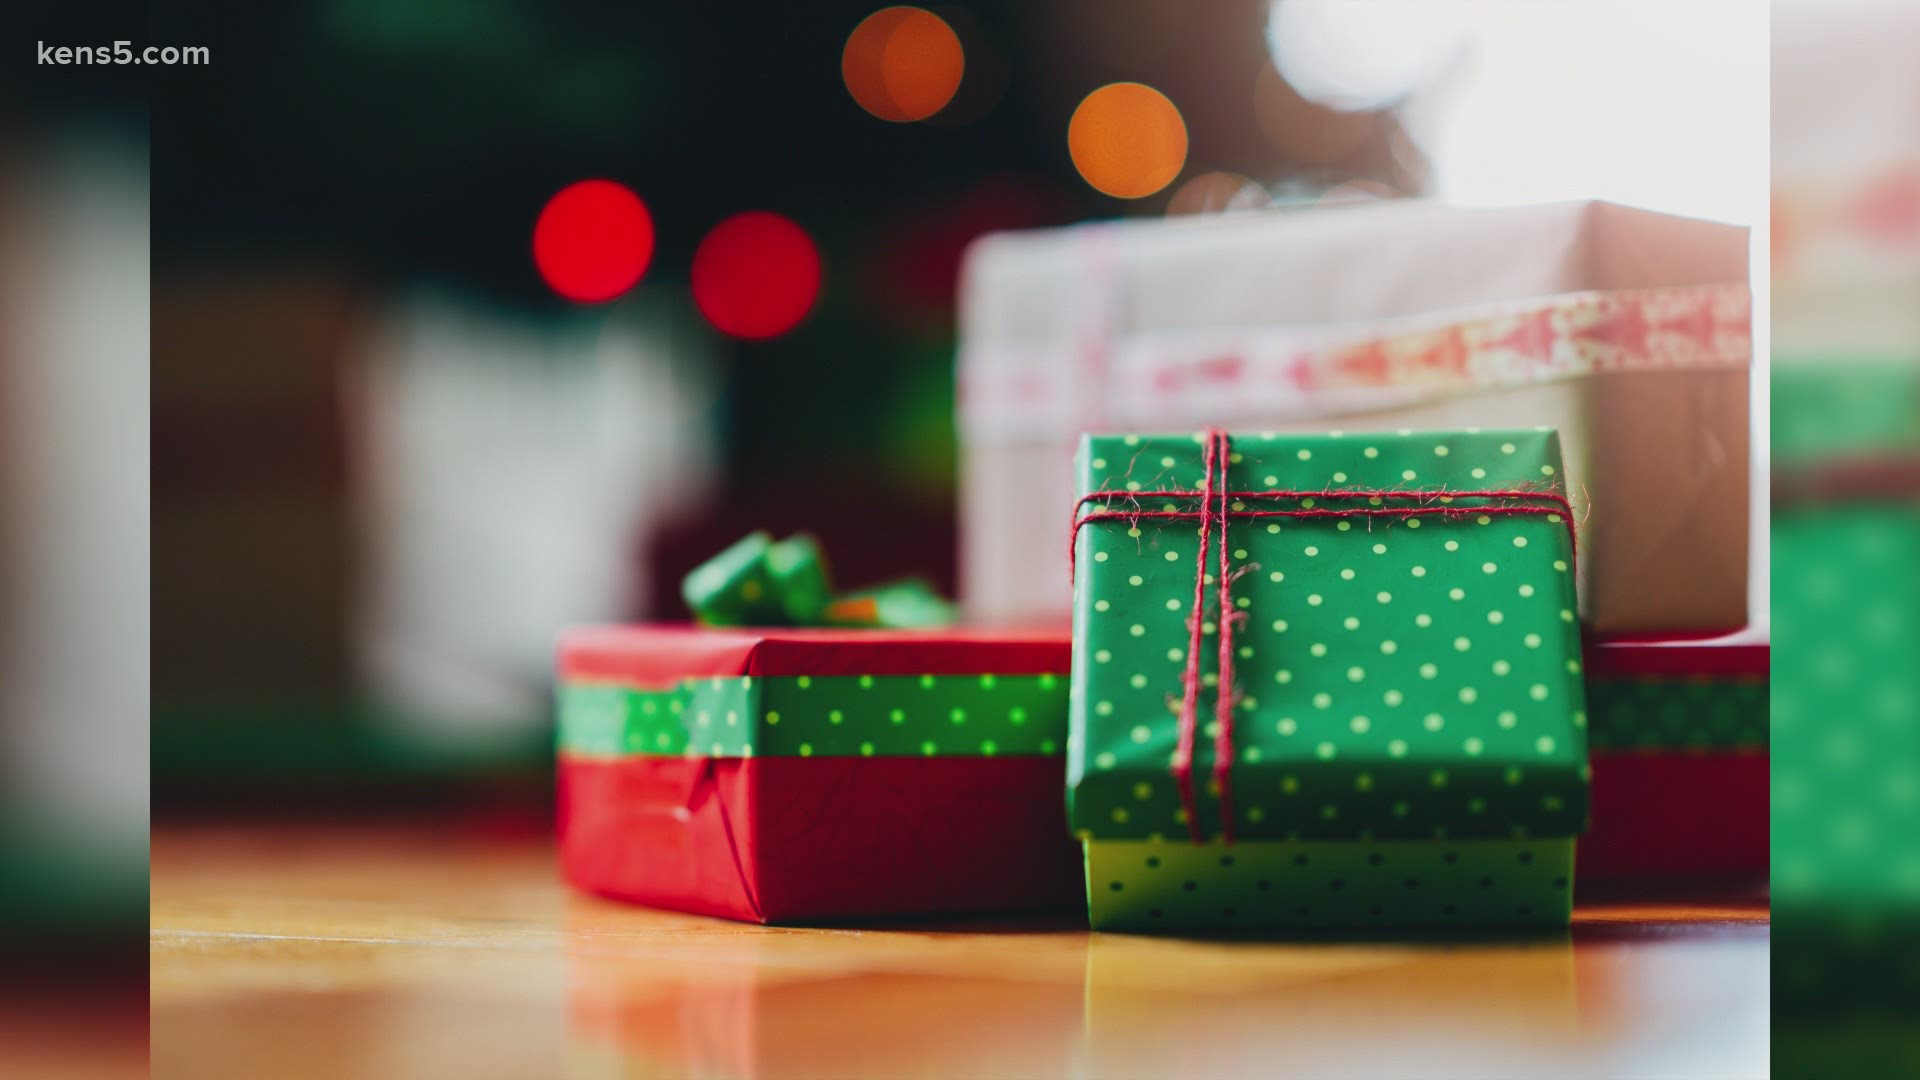 Stressed about holiday shopping? Don't be! Digital Journalist Megan Ball shares some tips on how you can be a meaningful gift-giver this holiday season.